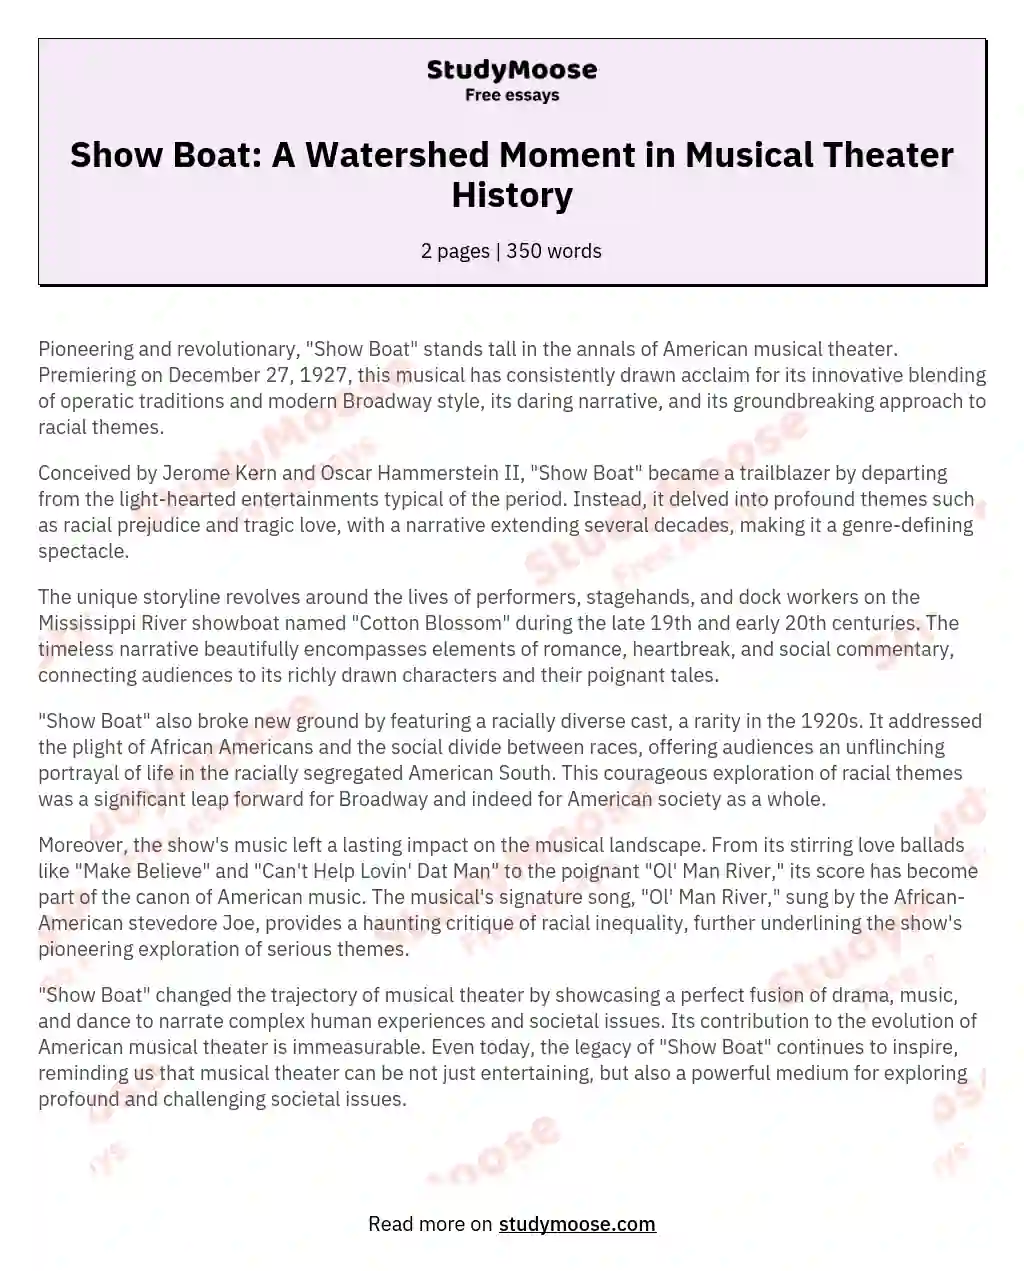 Show Boat: A Watershed Moment in Musical Theater History essay